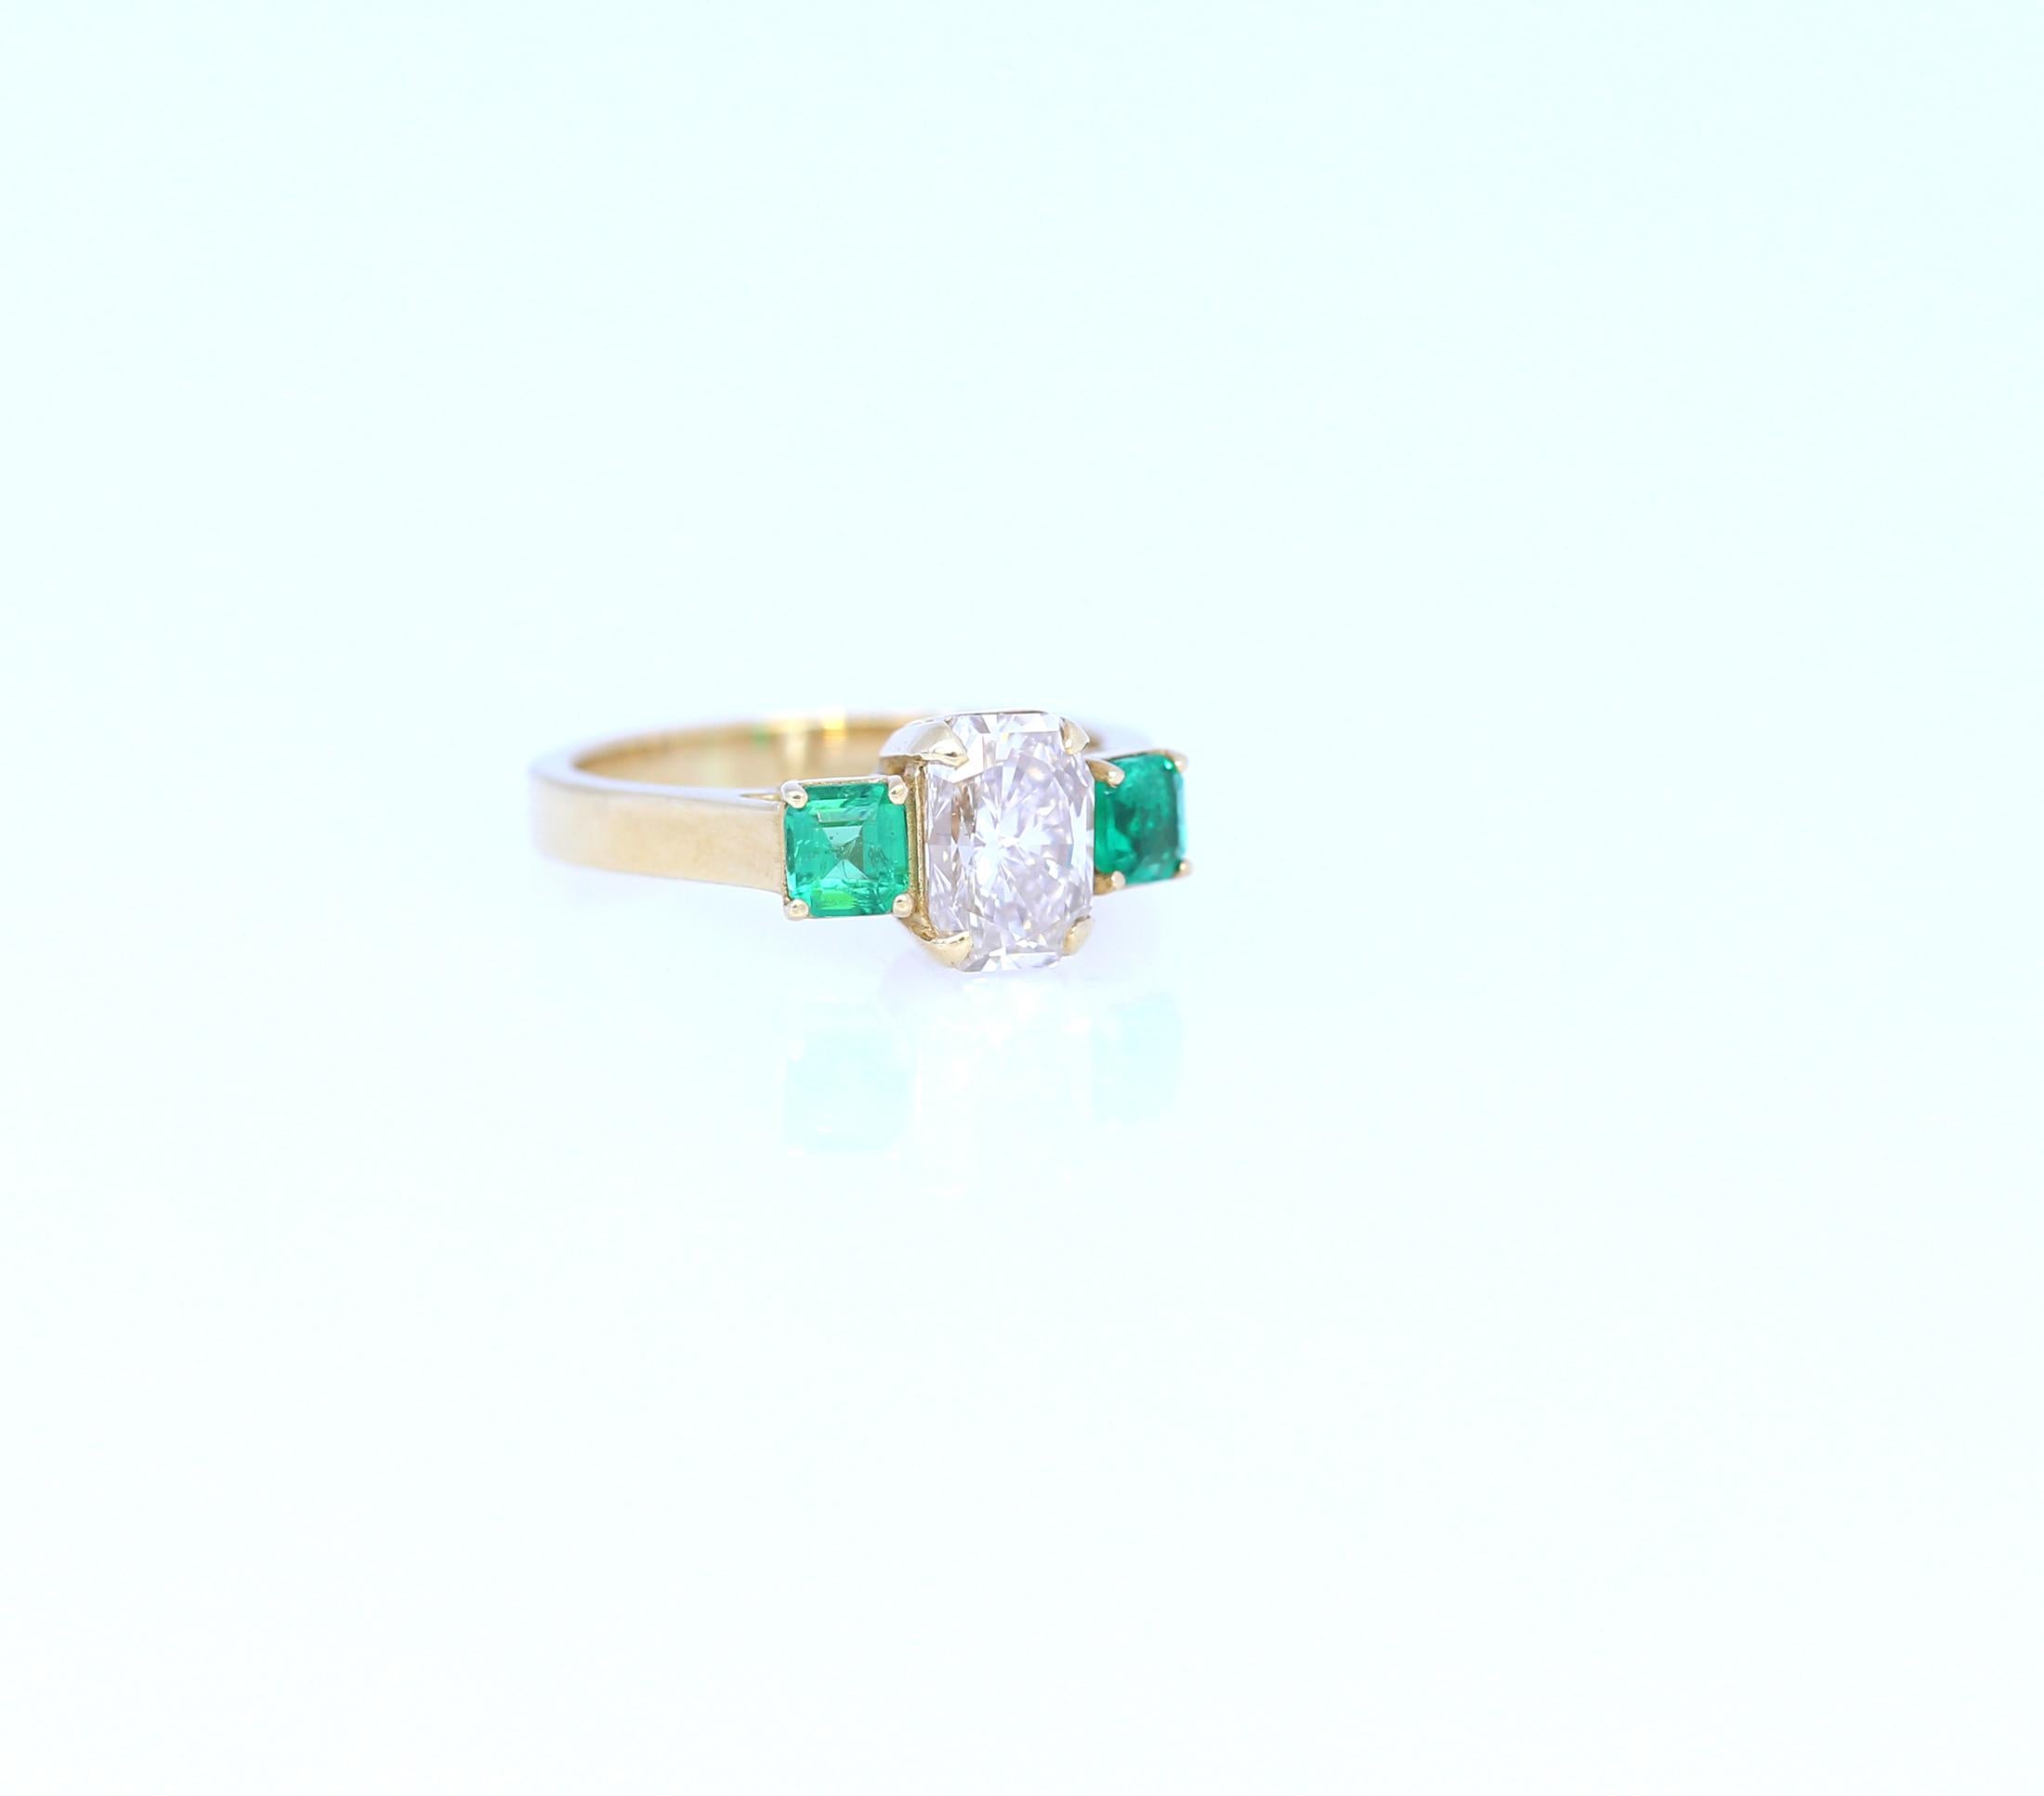 Engagement Ring 1.59Ct with Fine Diamond VVS Emerald-cut. Two Emeralds square cut of Columbian origin clean and fine colour.
Stamped 18K Yellow Gold. 2013. Please take a look at Gemological Certificate for the Diamond.
A remarkable item with a